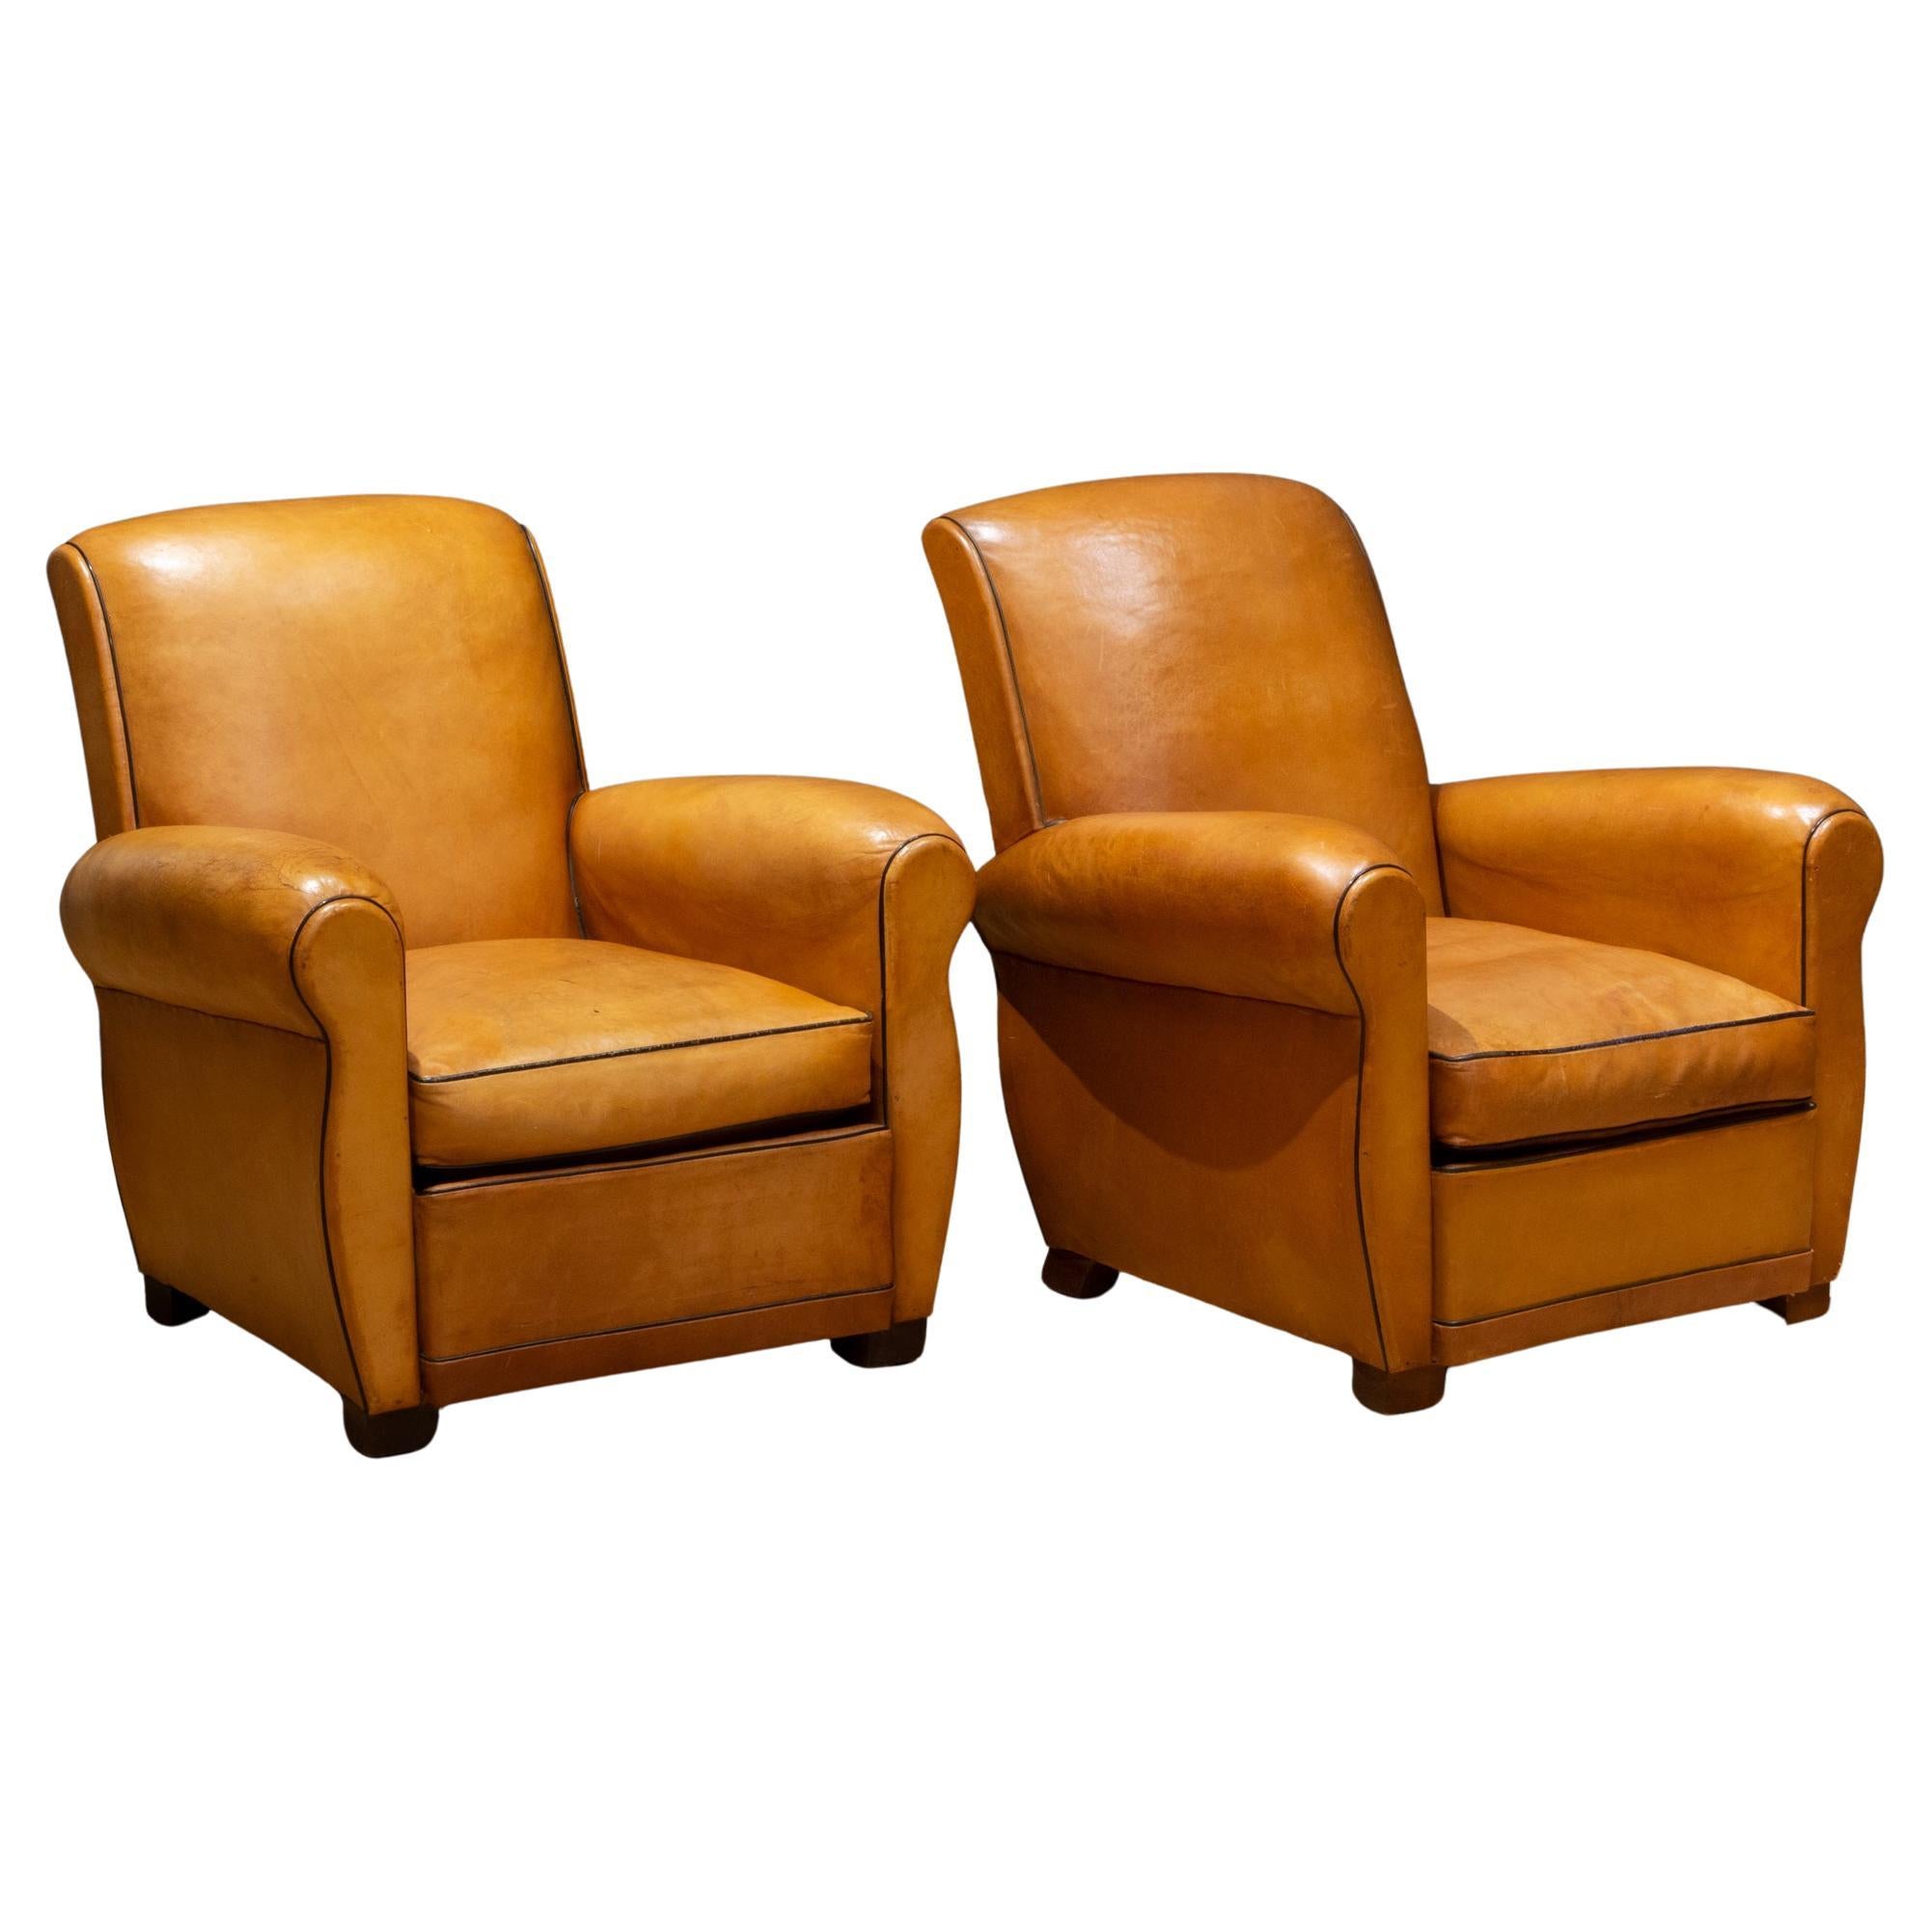 Pair of French Slopeback Light Caramel Leather Club Chairs c.1930-1940 For Sale